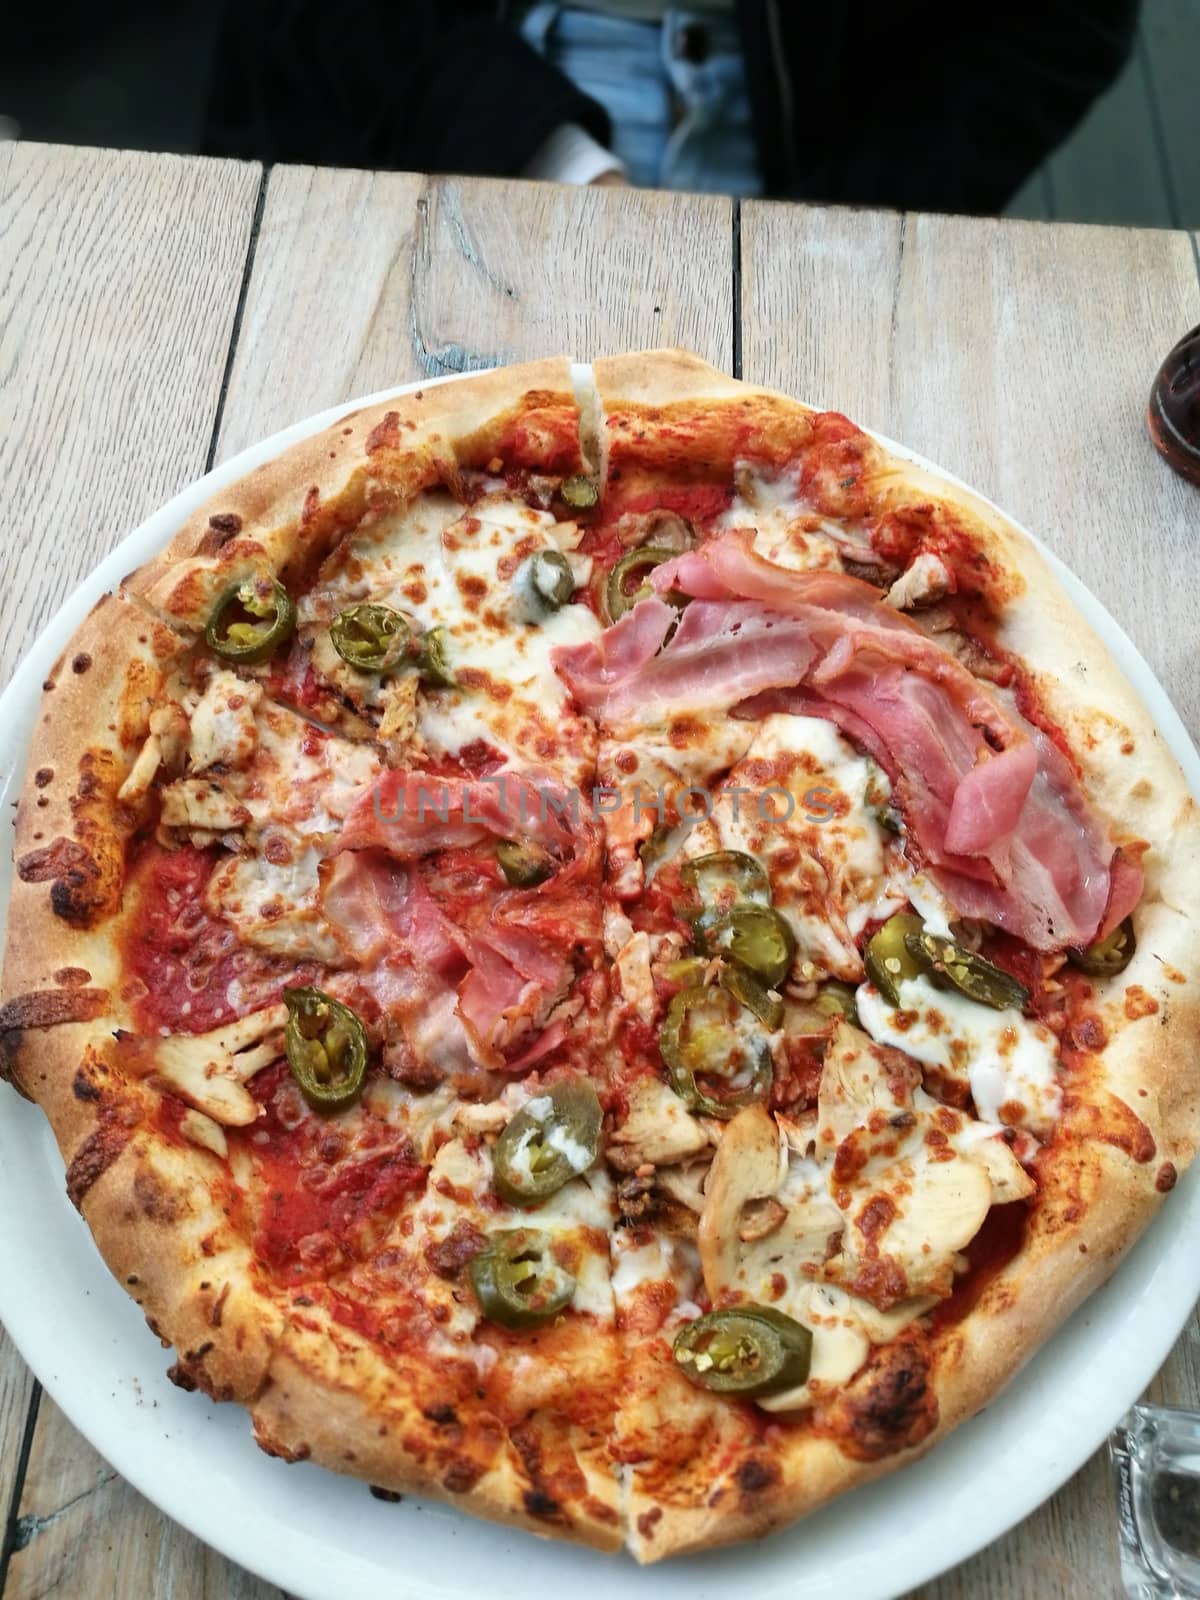 A pizza sitting on top of a wooden table. High quality photo